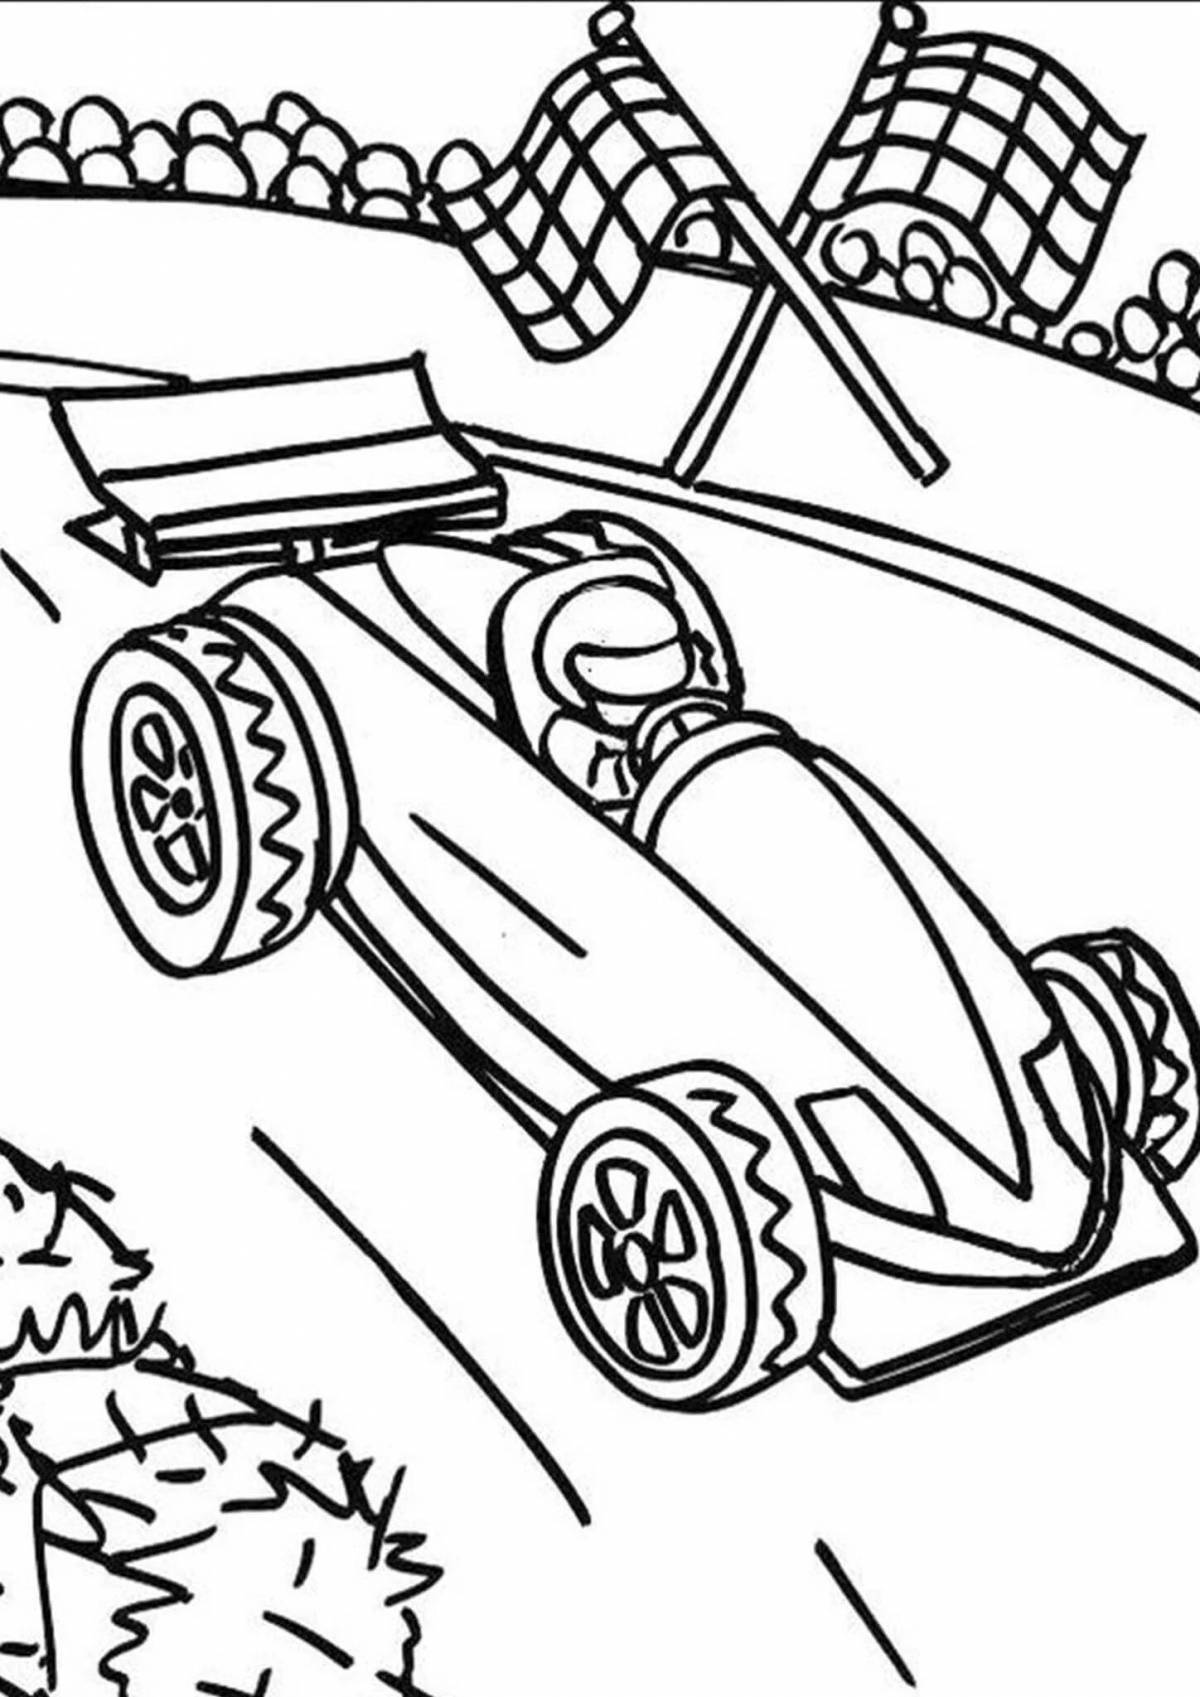 Exciting coloring book for kids